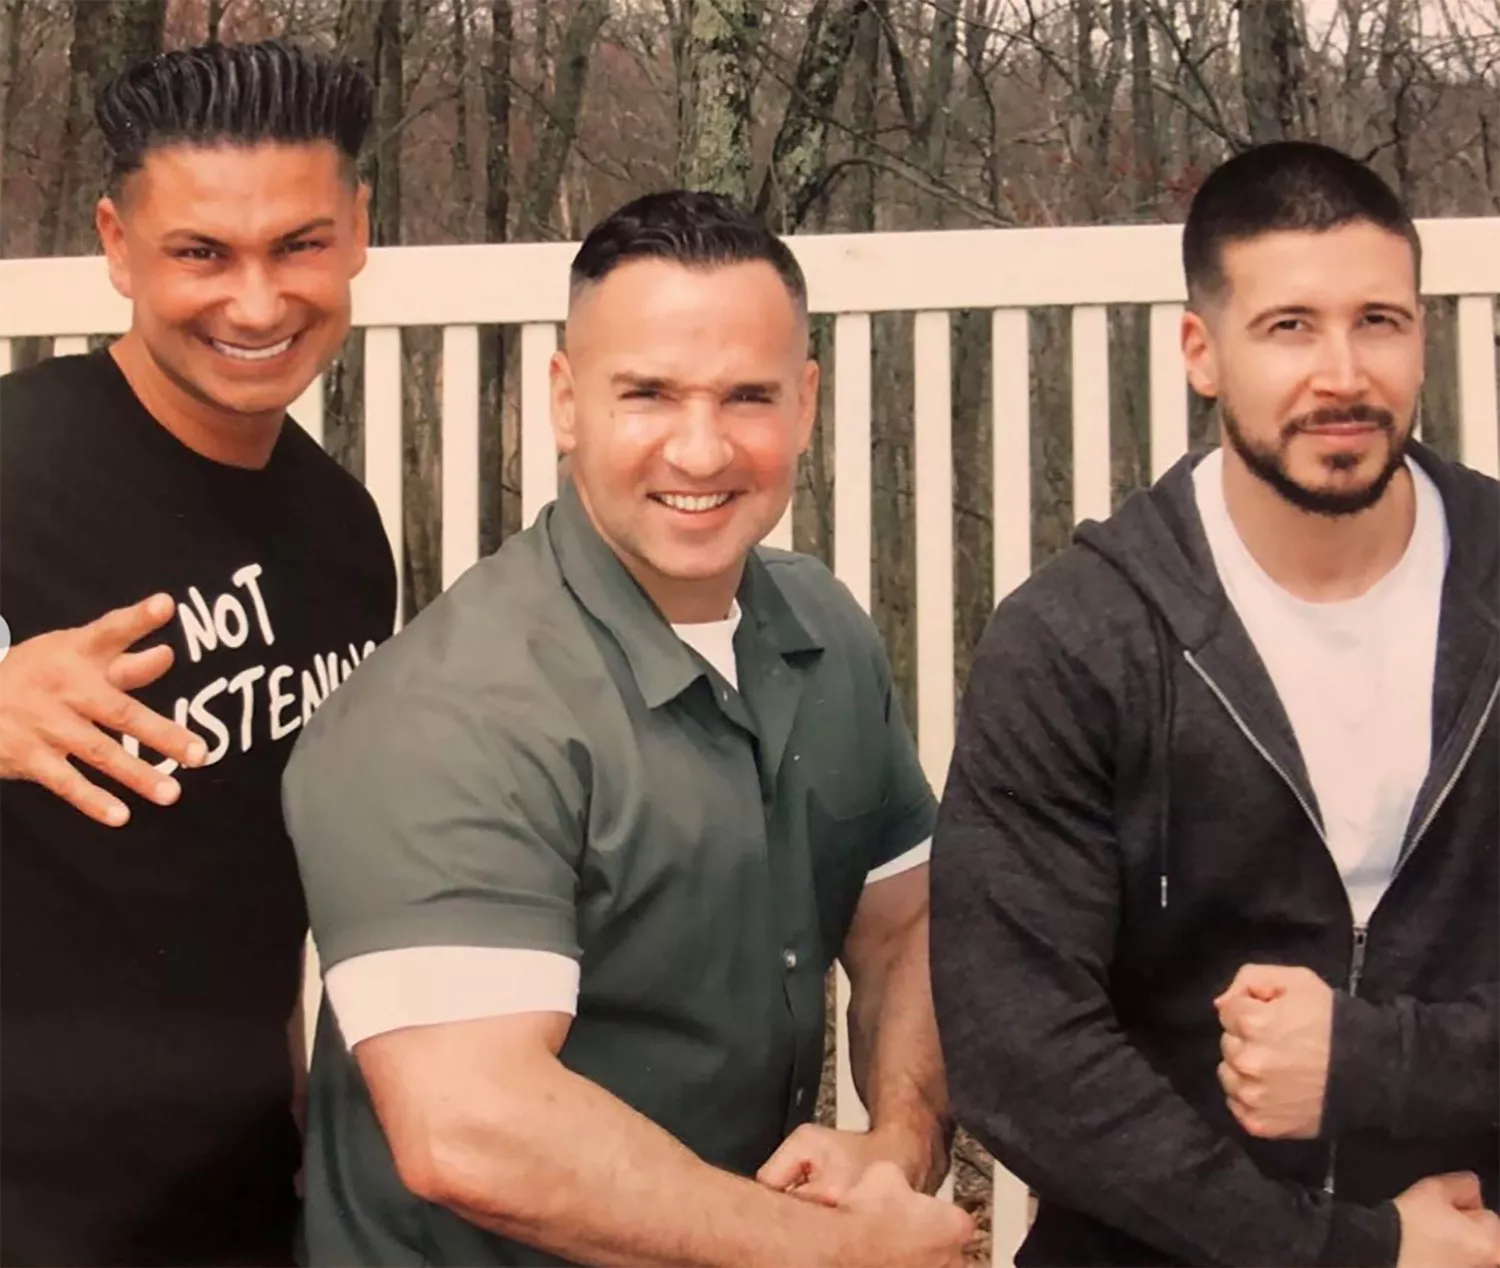 Jersey Shore’s Pauly D (left) and Vinny Guadagnino (right) visited Mike Sorrentino in prison